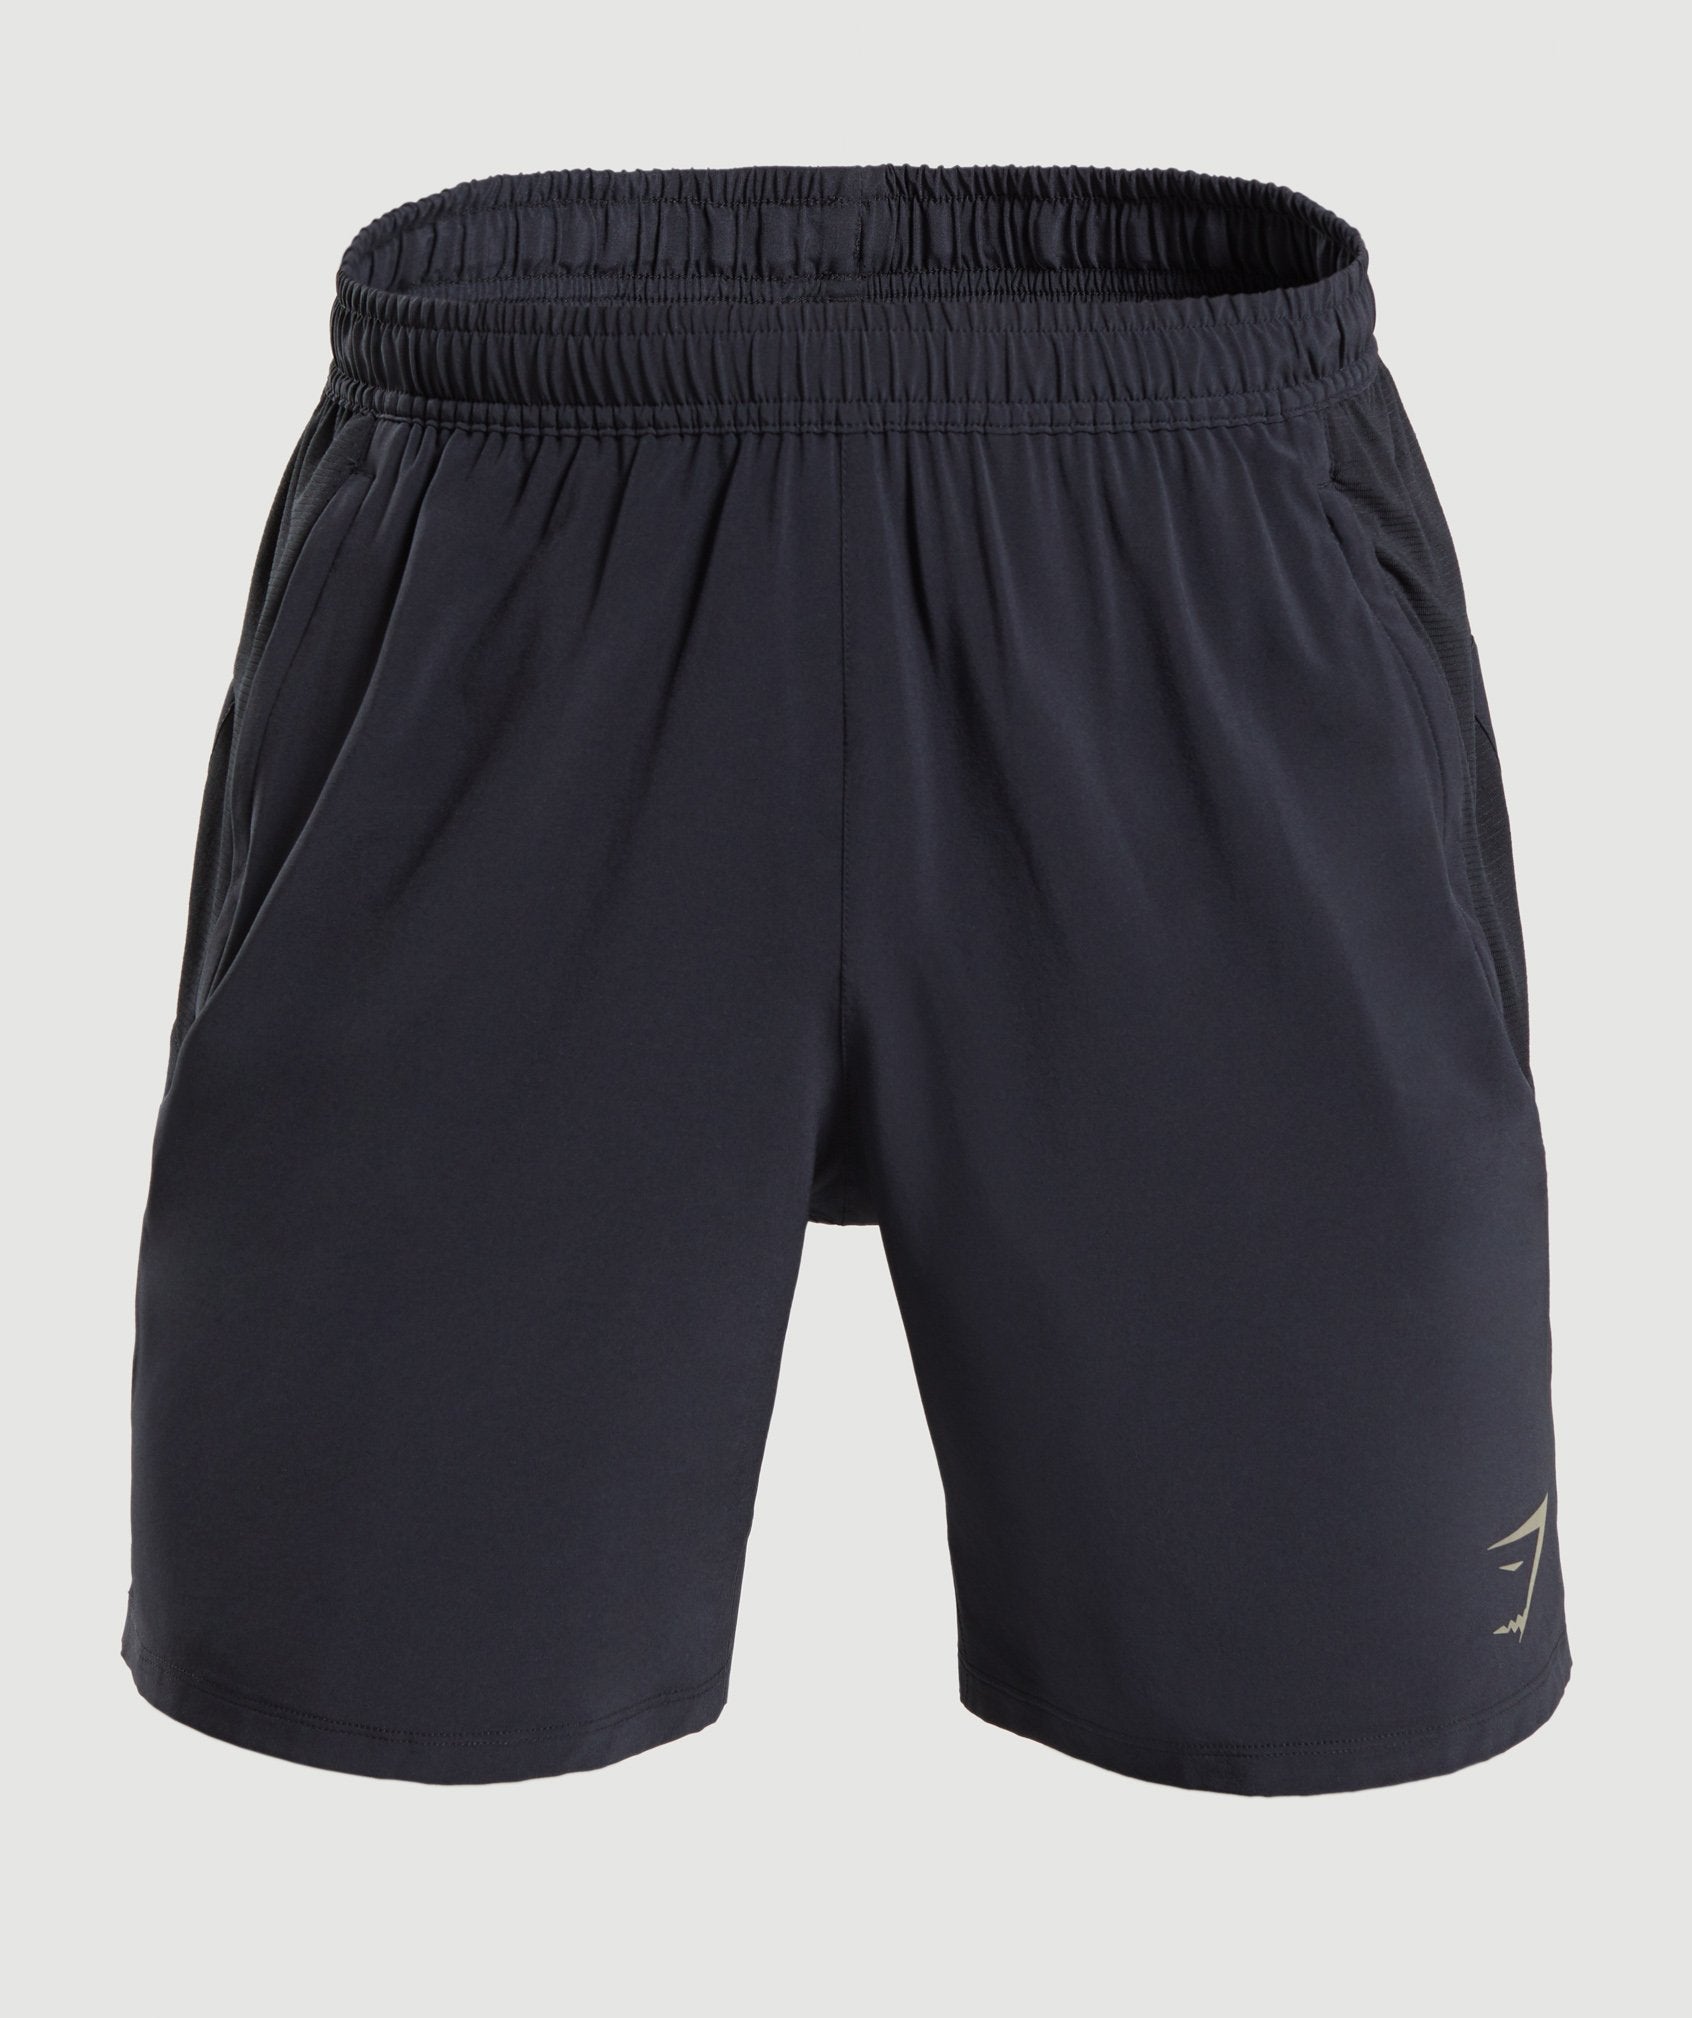 Contemporary Shorts in Black